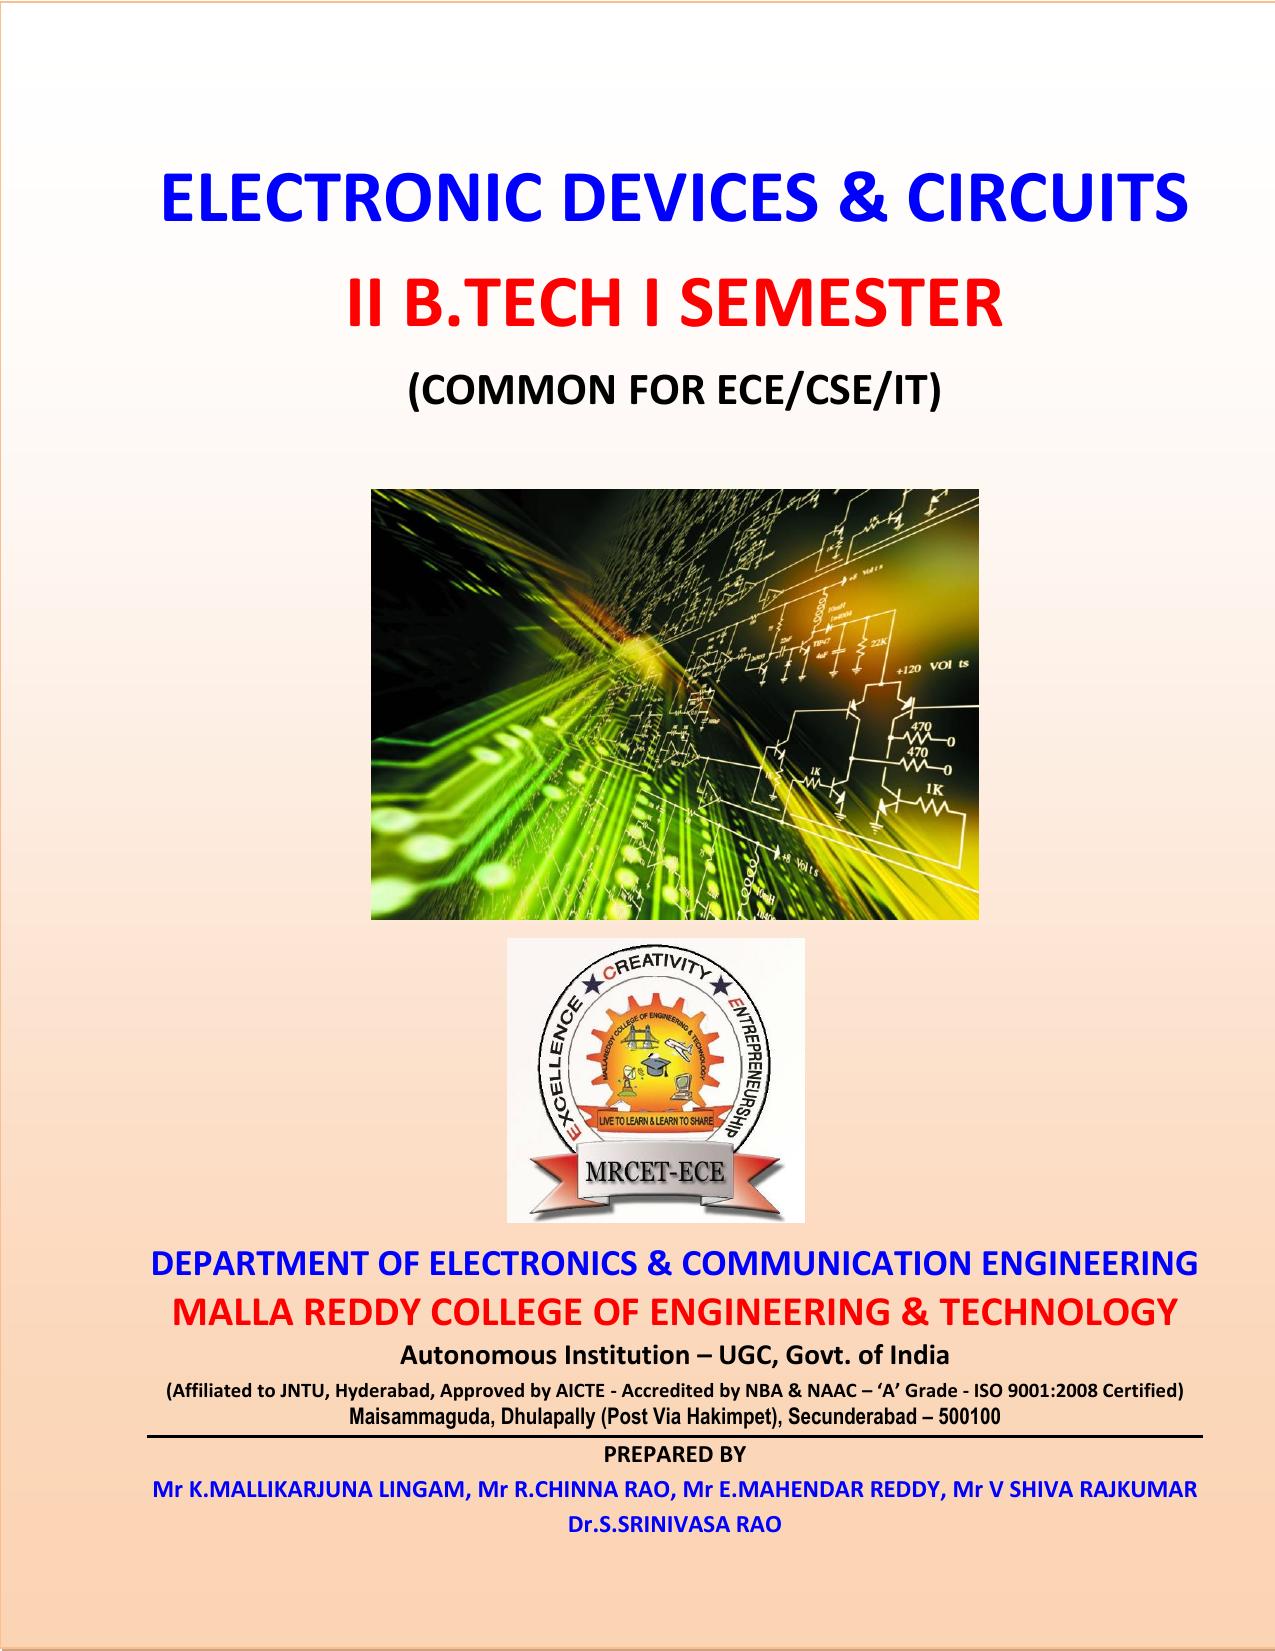 Electronic Devices and Circuits 2012